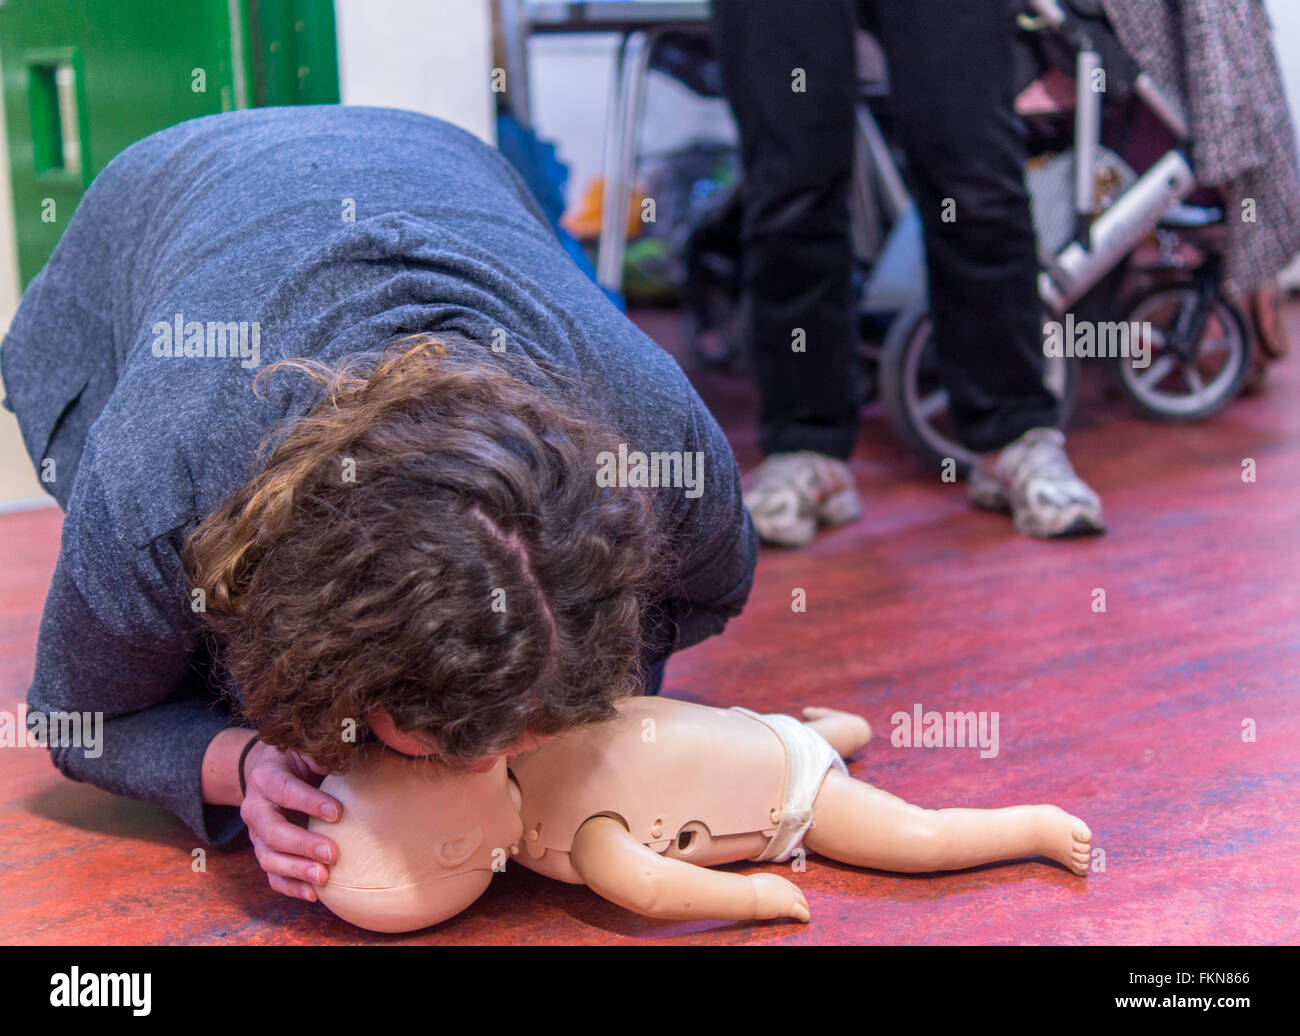 Parents and grandparents are given Basic Life Support (BLS) instruction. PICTURED: mouth to mouth technique. Stock Photo